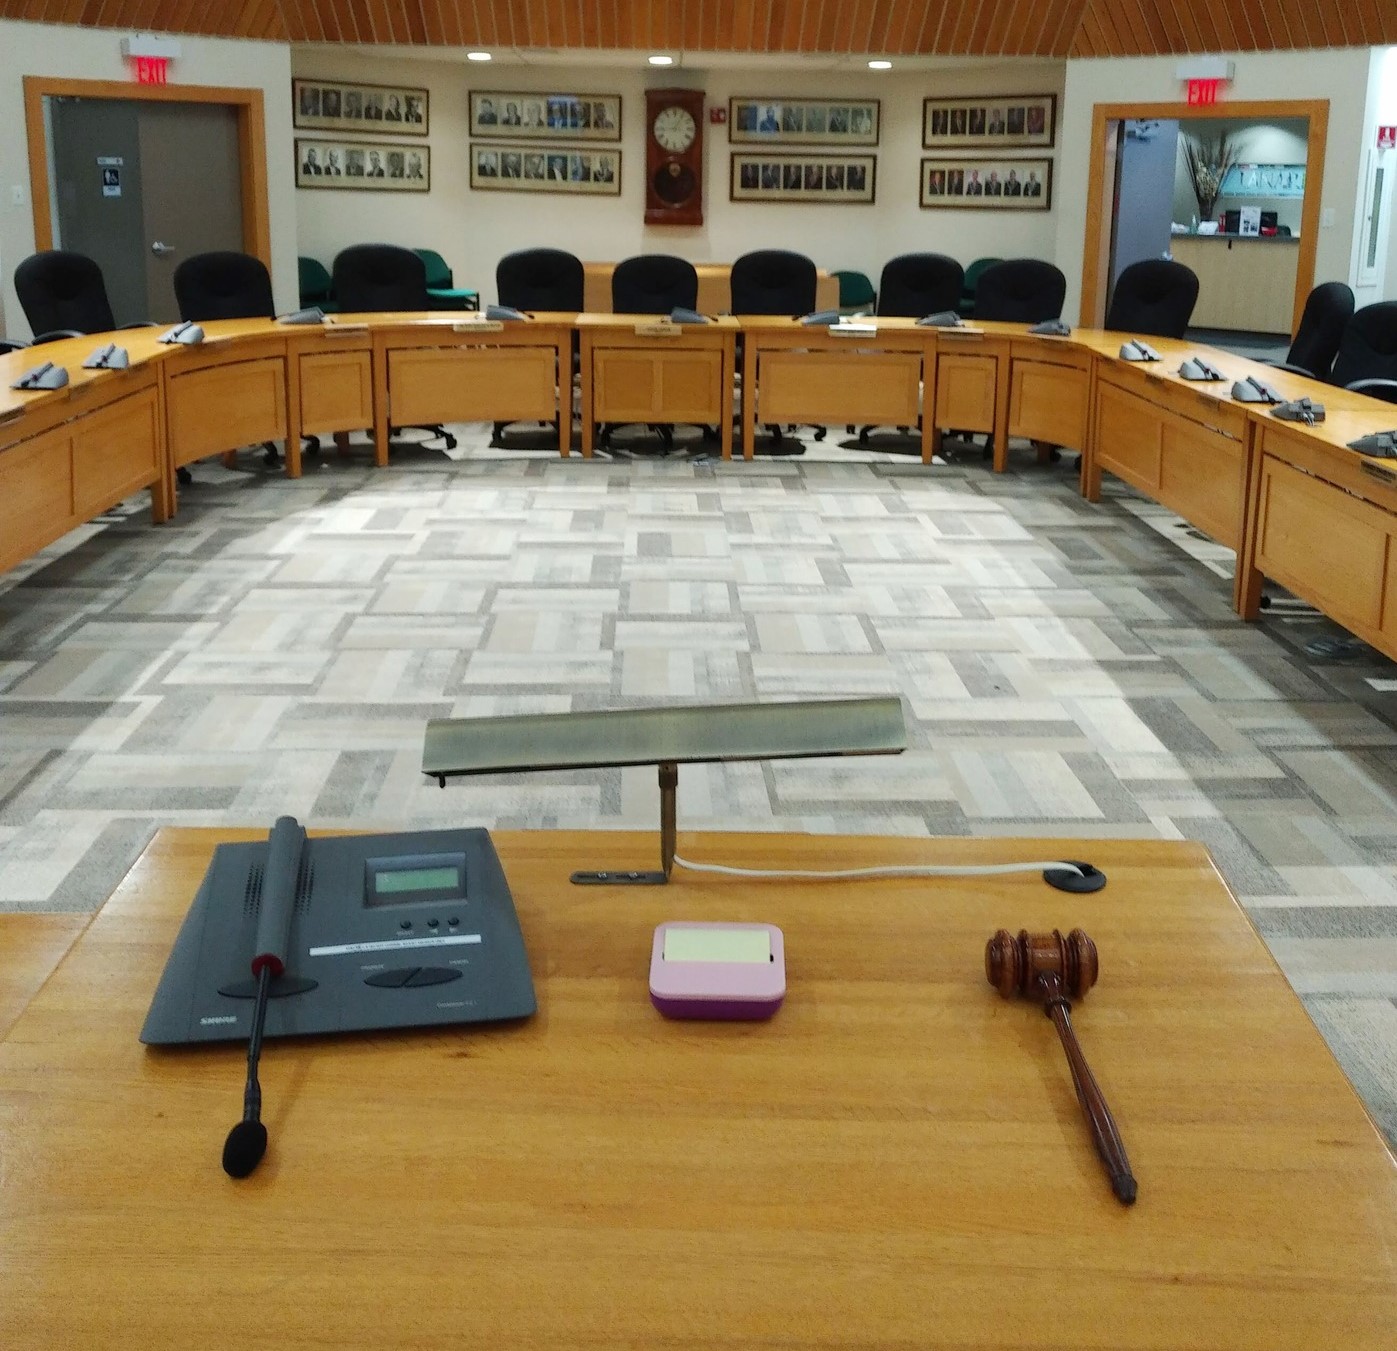 Photo shows council chambers with wooden tables arranged in horseshoe